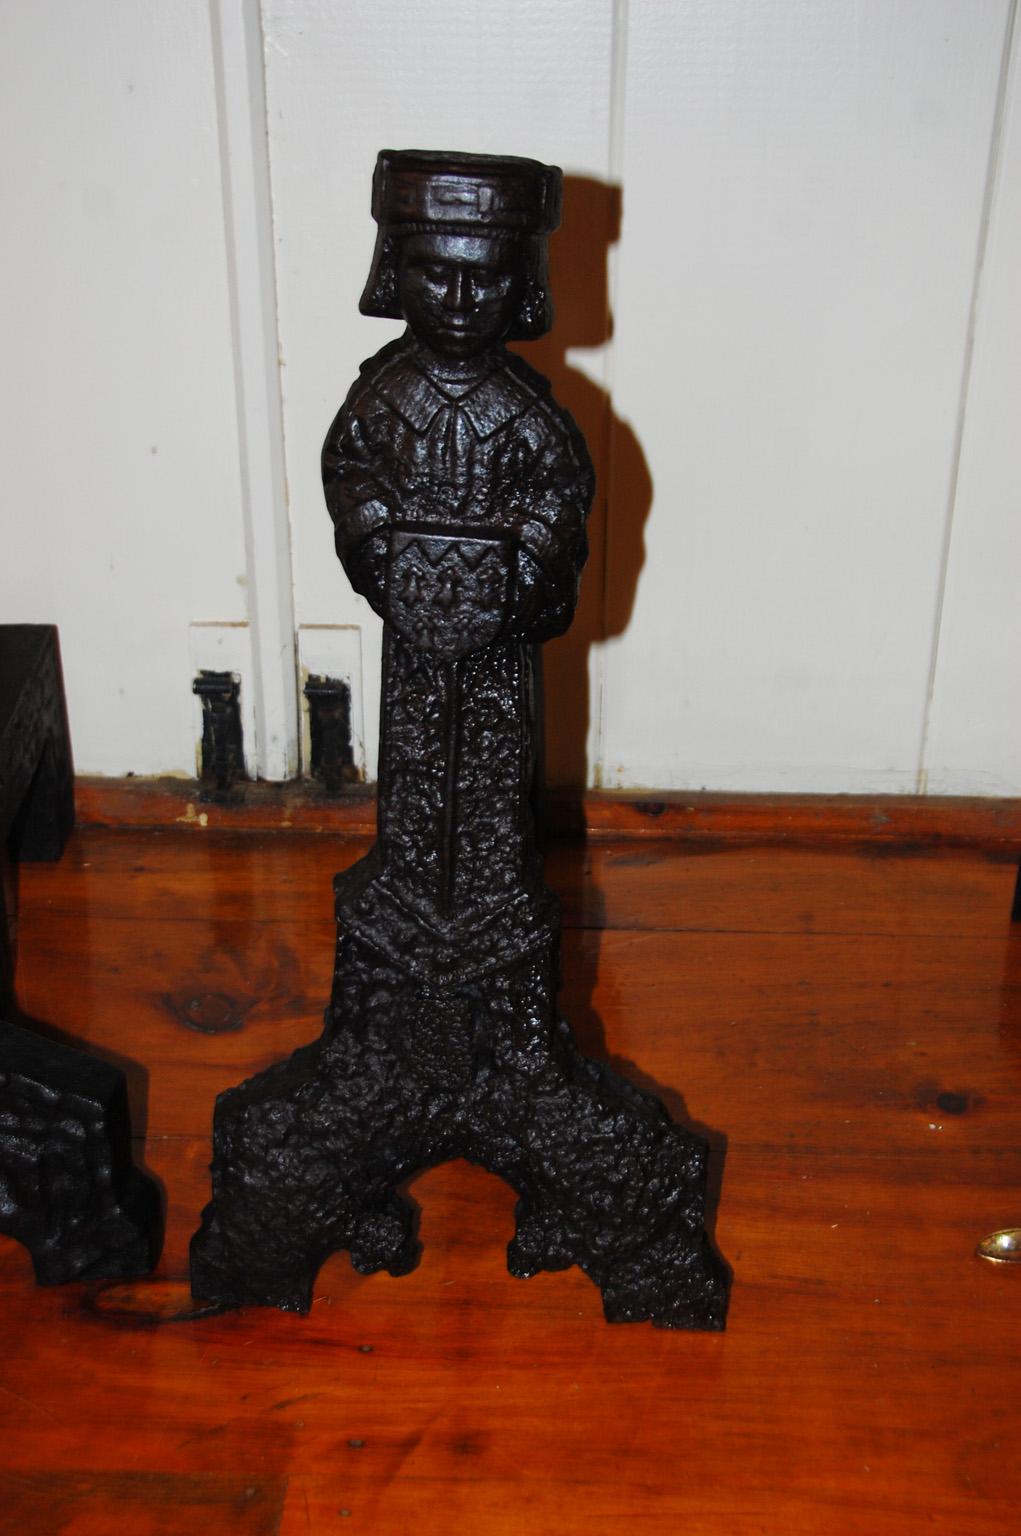 French Francis the First Renaissance Period cast iron andirons in the shape of courtiers with their signature caps and arms holding shields bearing fleur de lys. These truly rare andirons were created when the vagaries of casting iron were far from